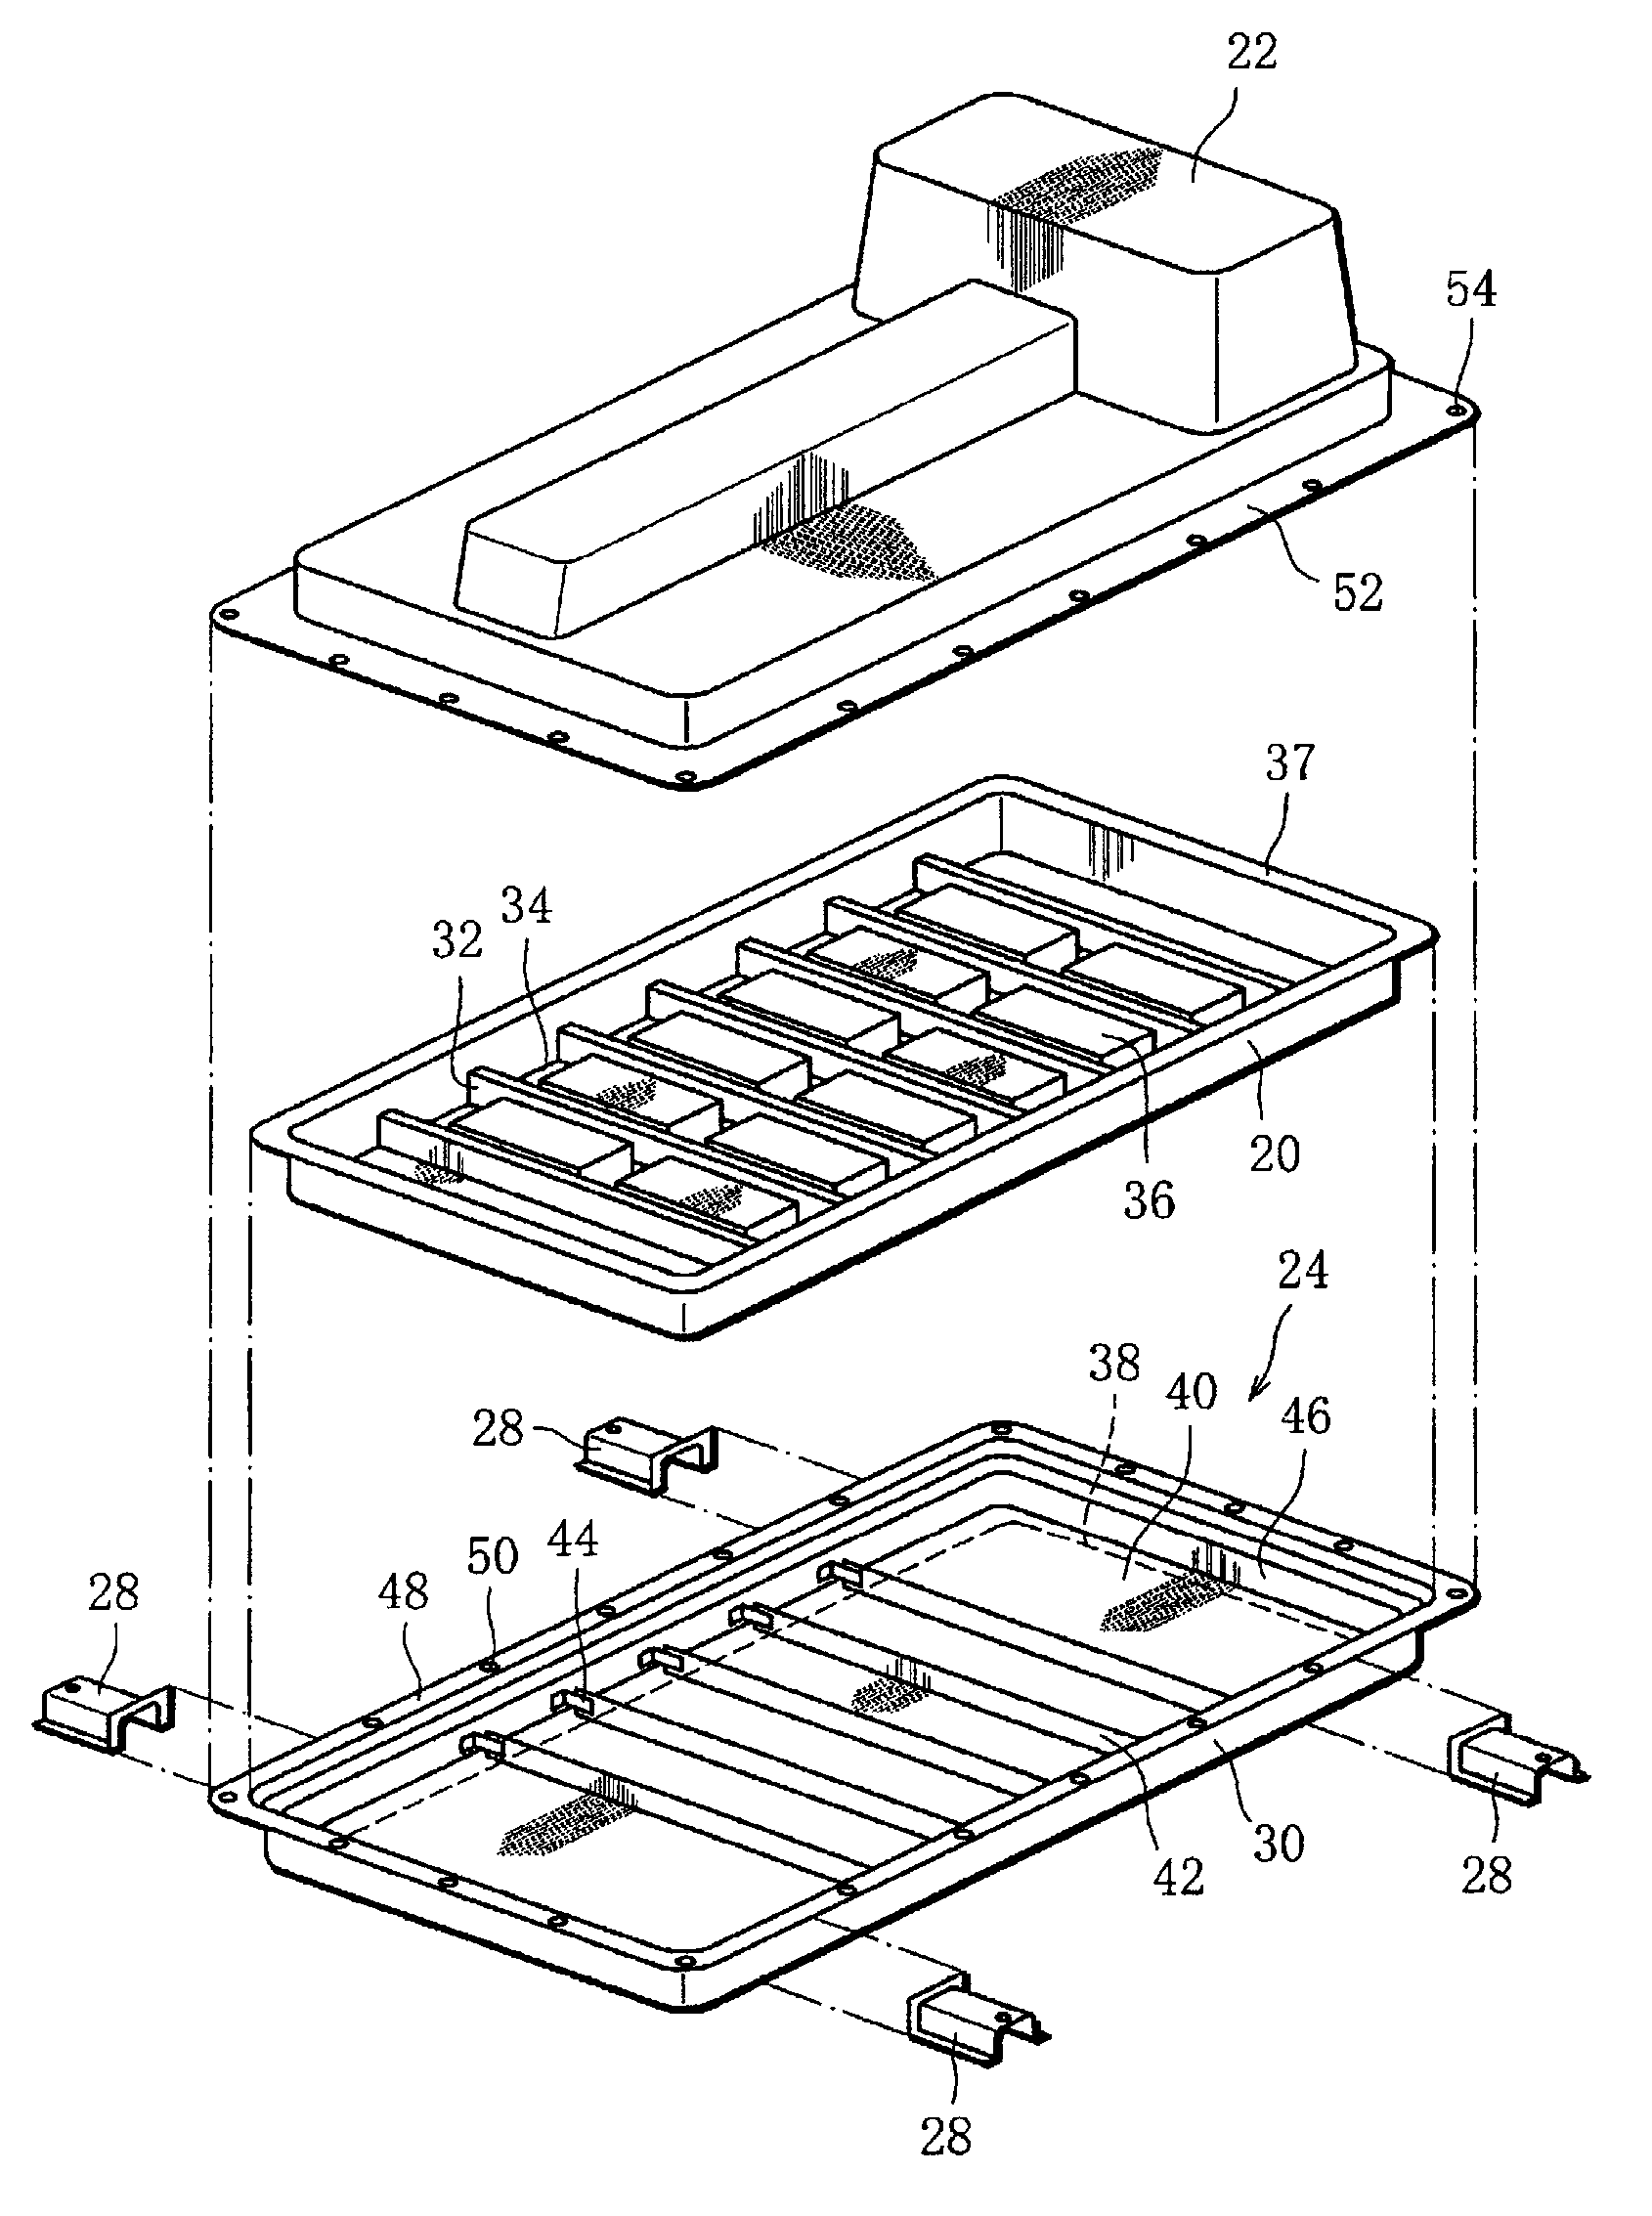 Battery case for vehicle